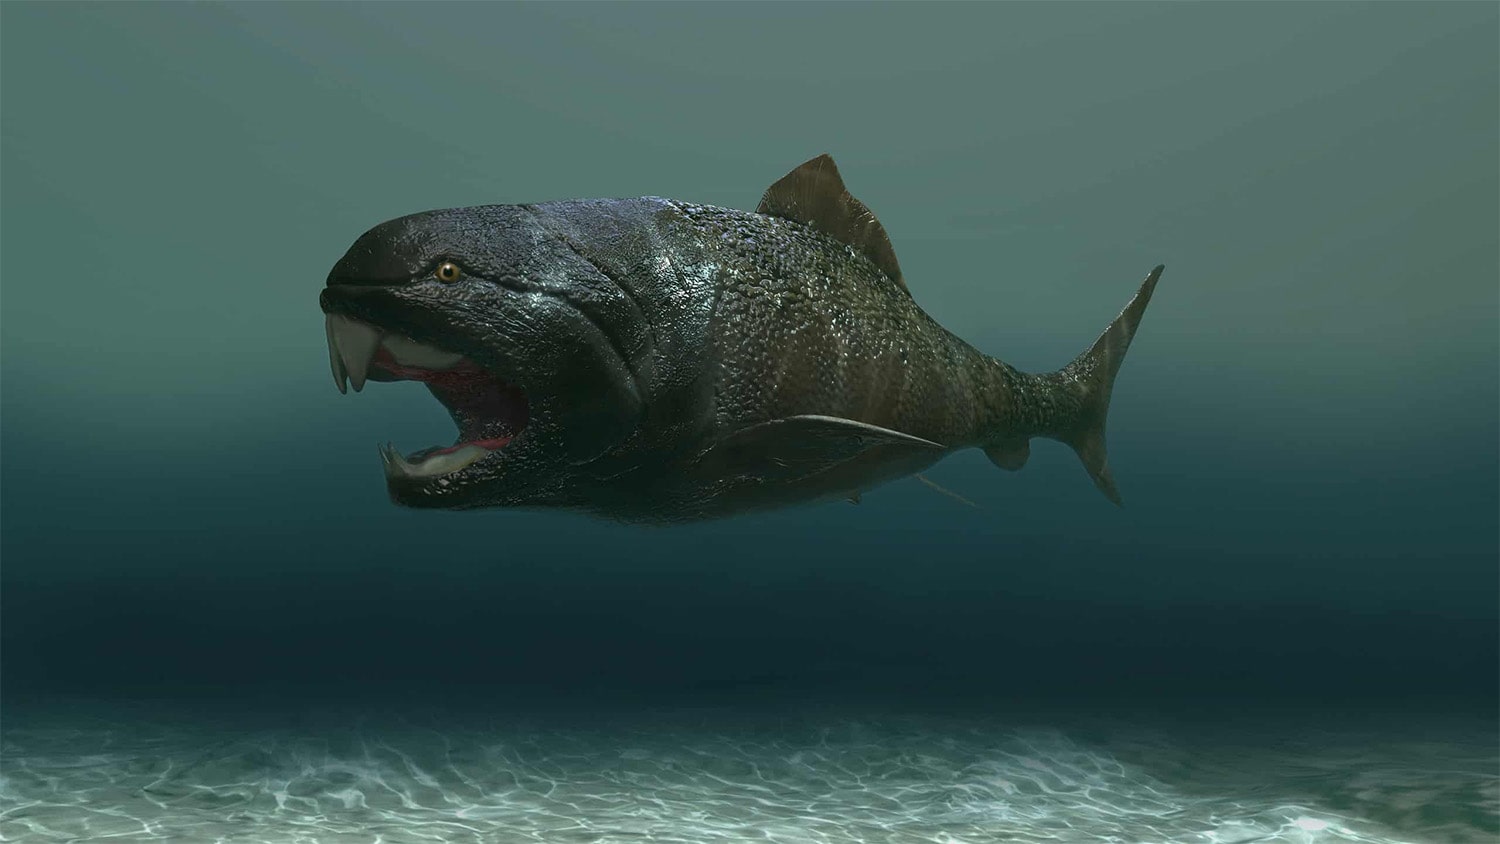 23 interesting facts about Dunkleosteus